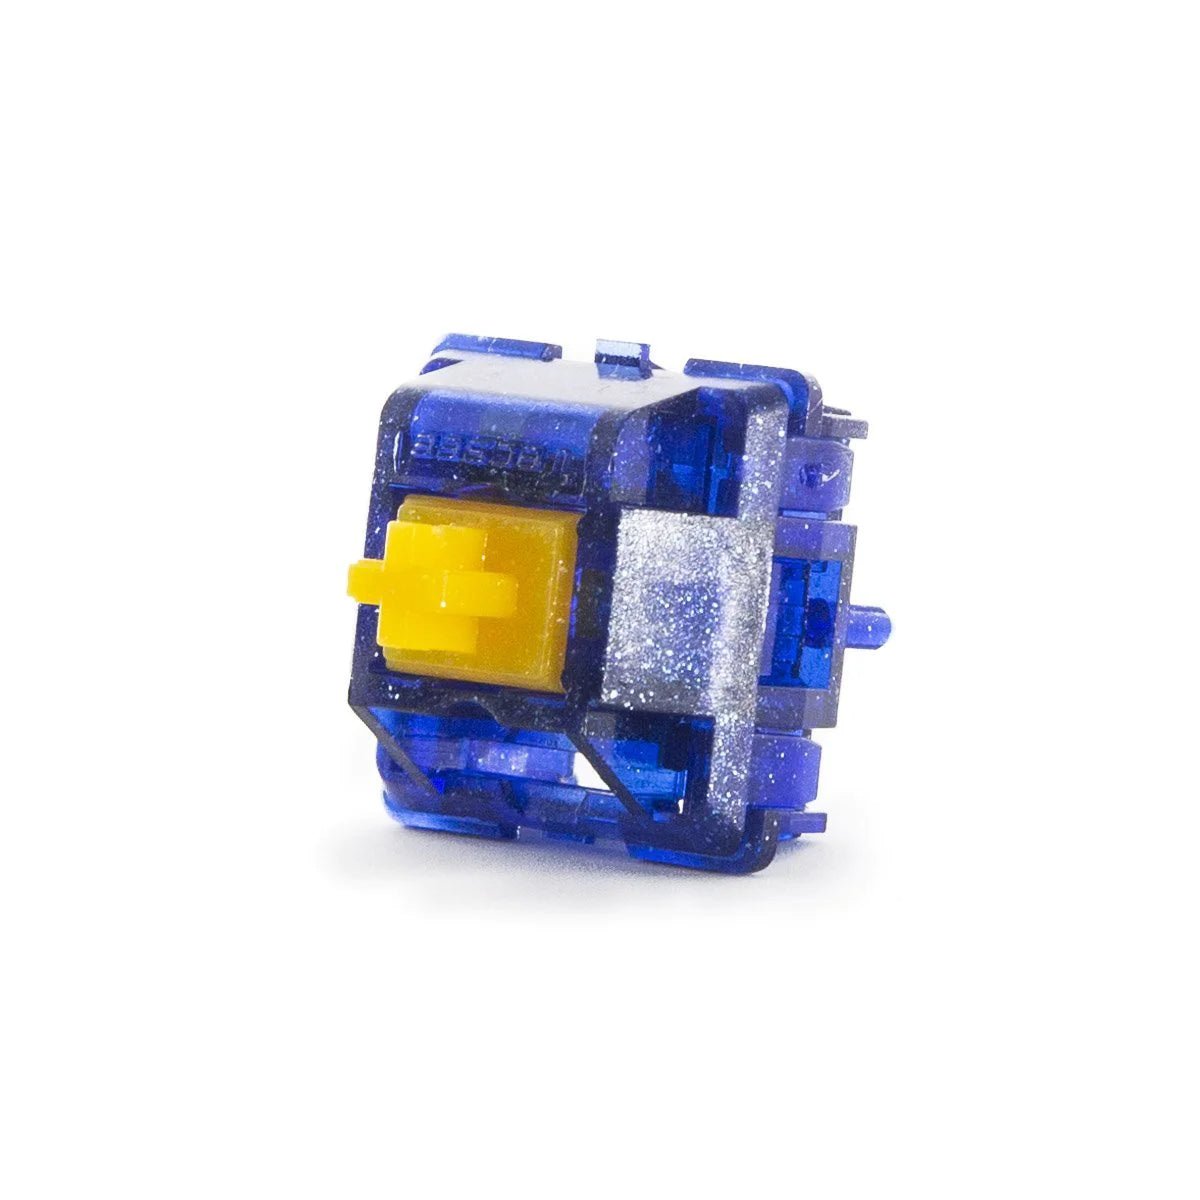 Tecsee Sapphire V2 Tactile Switches (Factory Lightly Pre-Lubed) - Meow Key